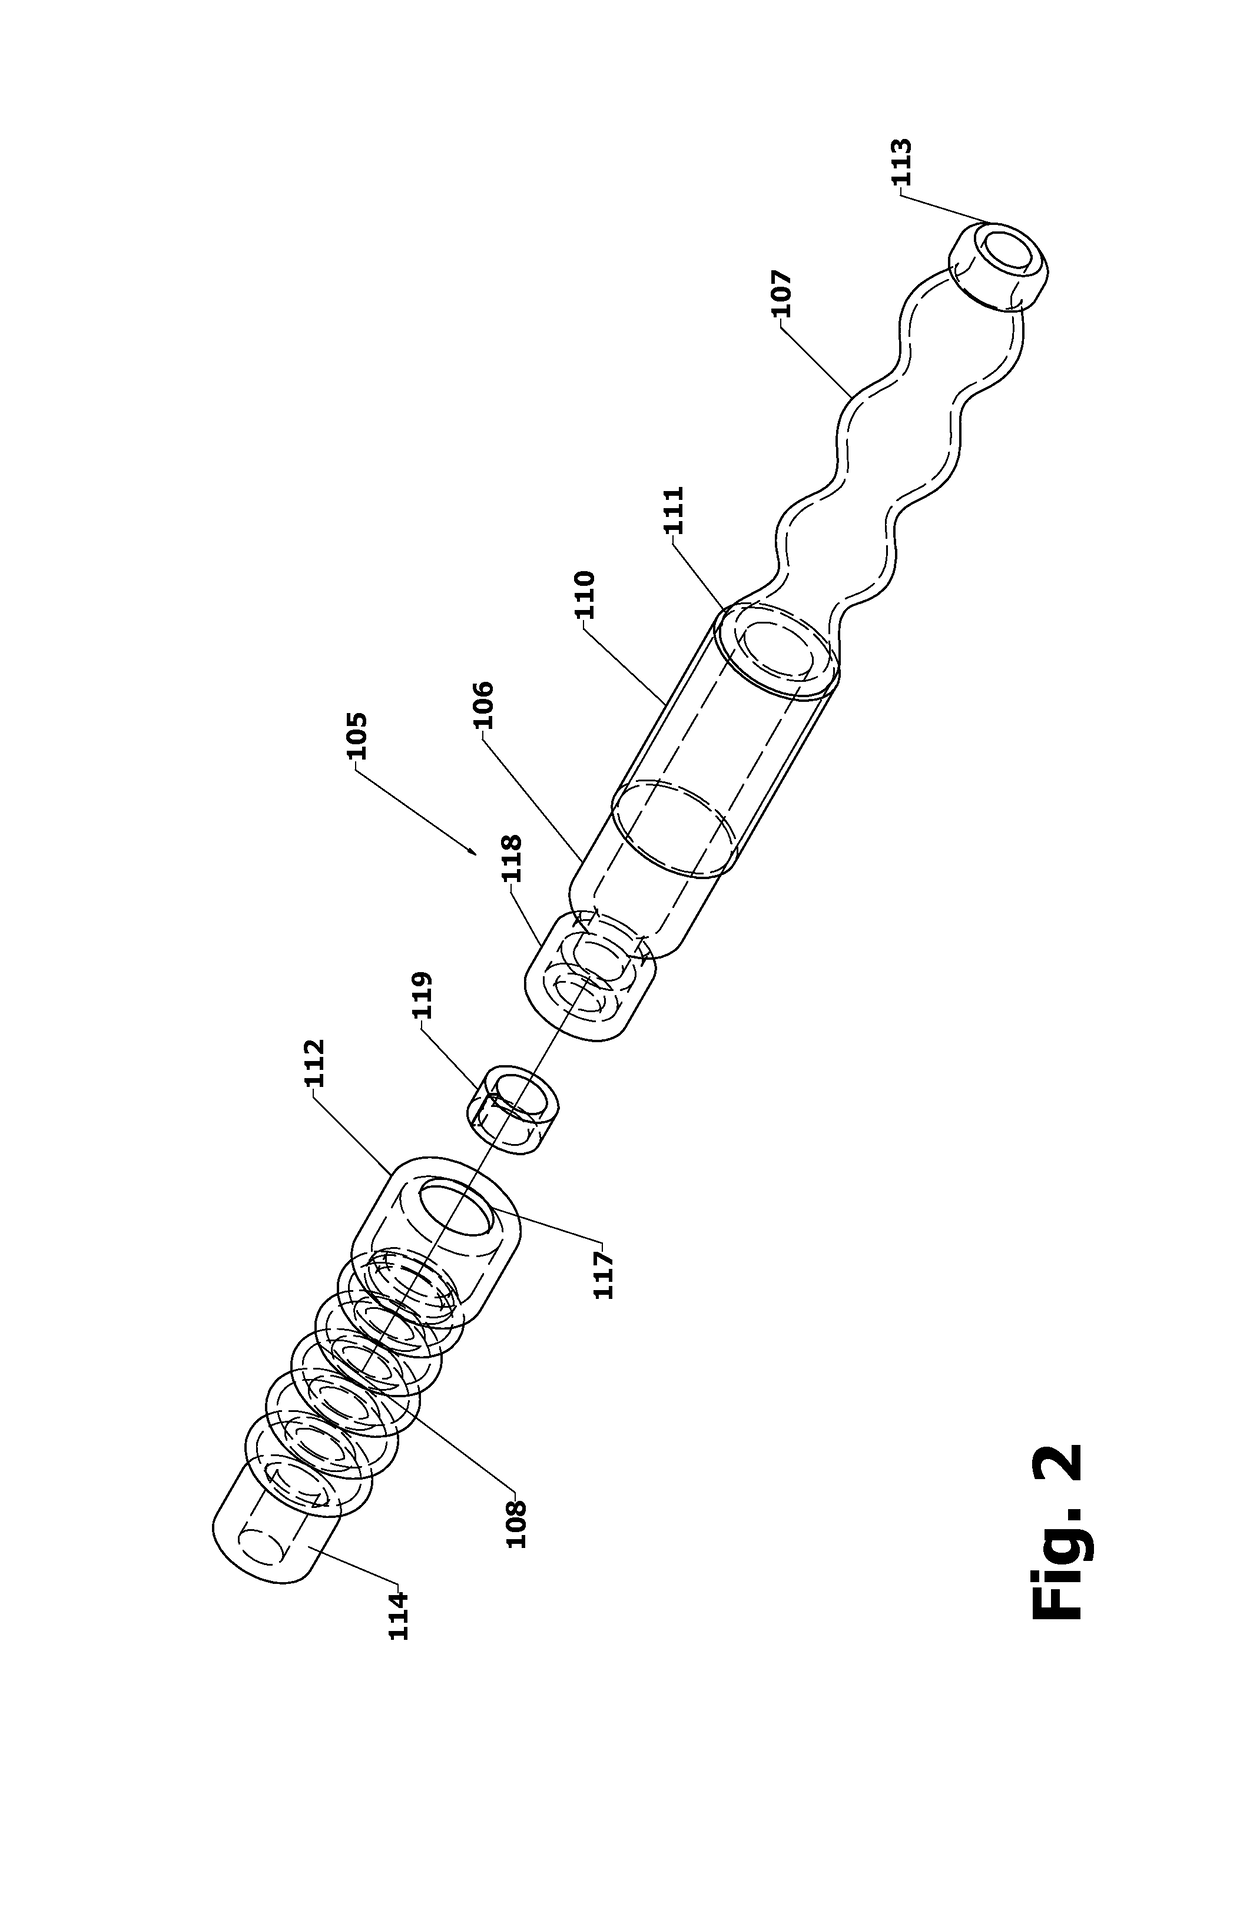 Implanted Medical Driveline Strain Relief Device